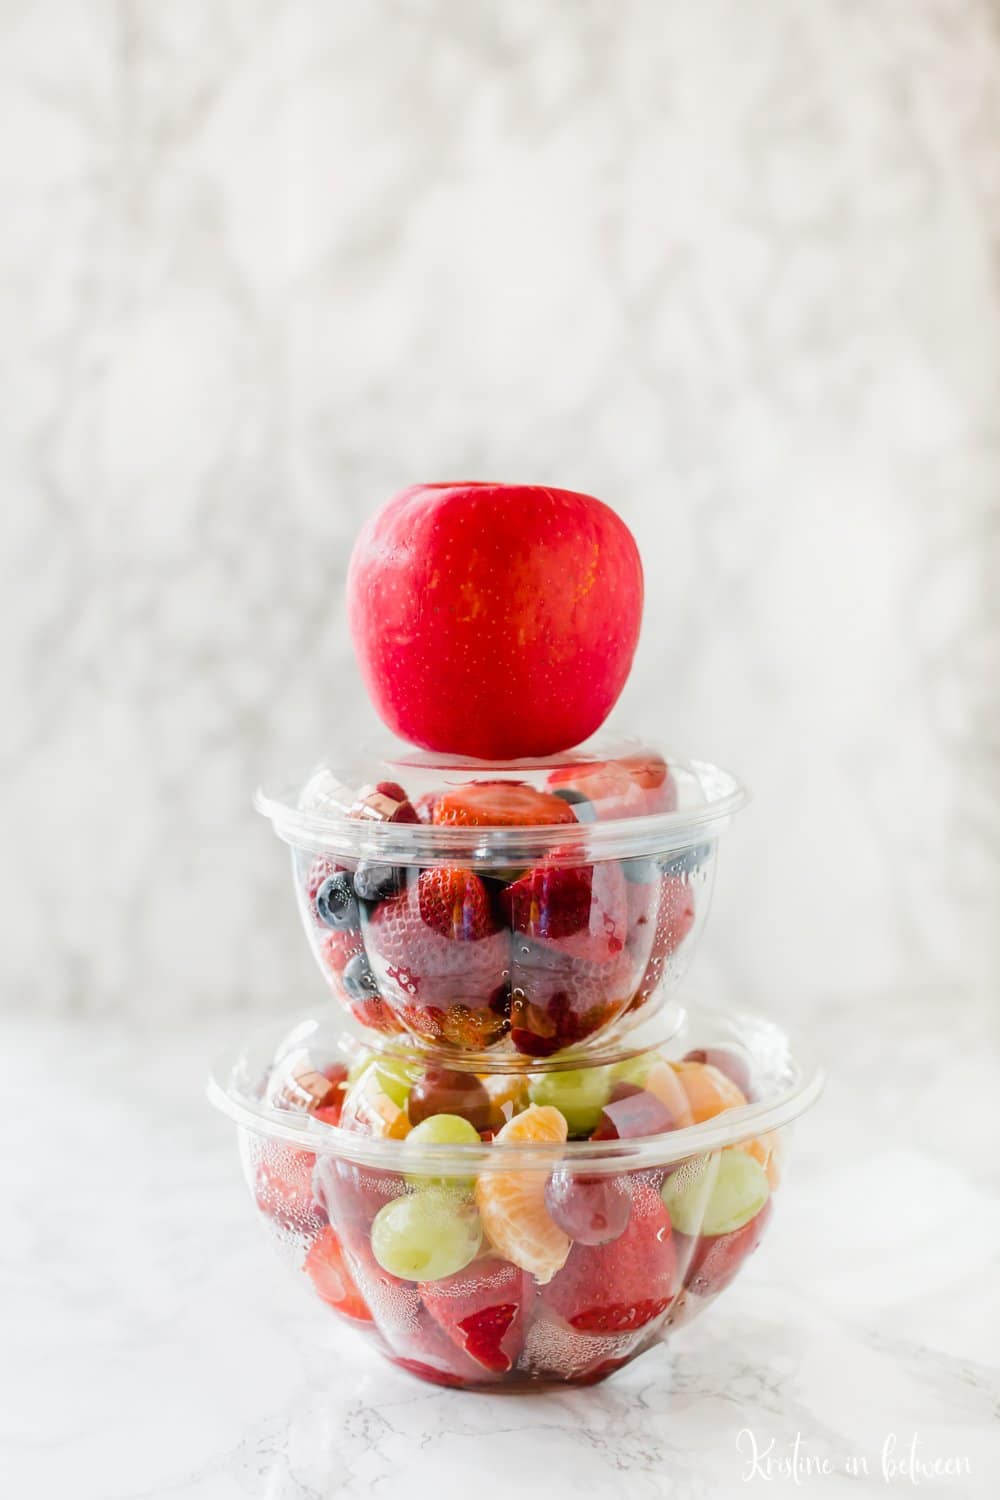 You'll love these easy ways to get your teen to eat more fresh fruit!